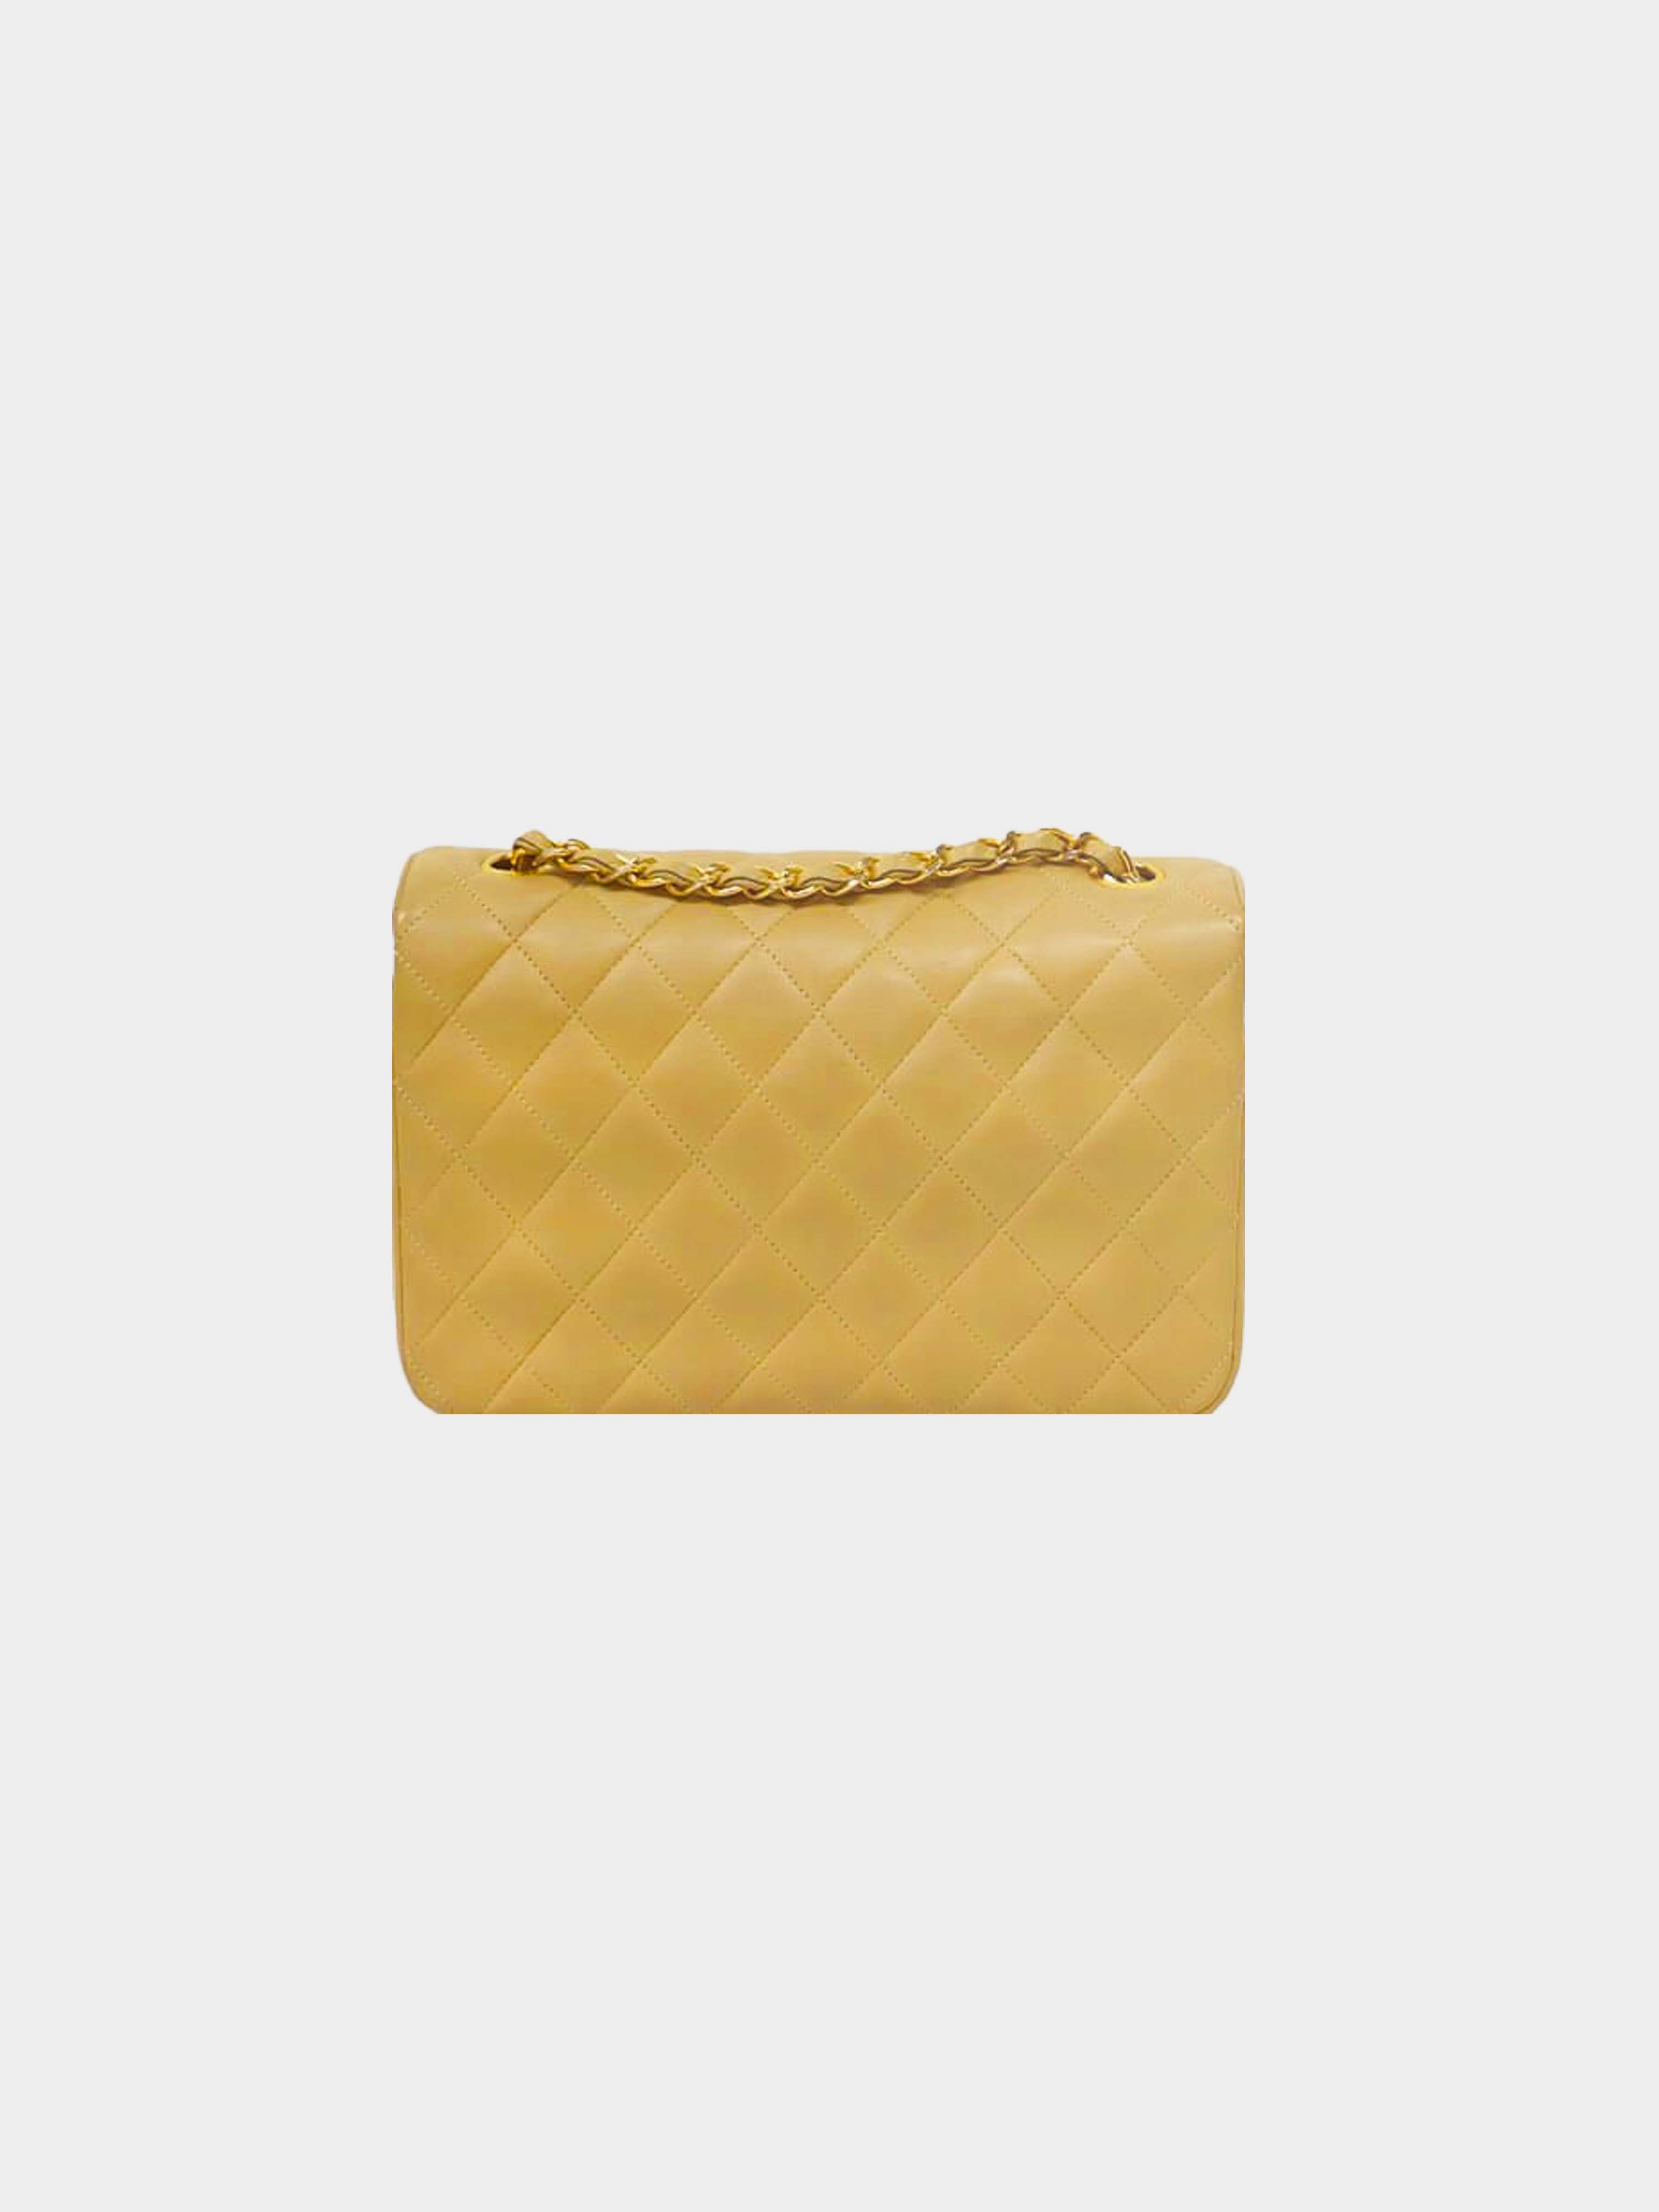 Chanel 1991 Beige Quilted Leather Flap Bag